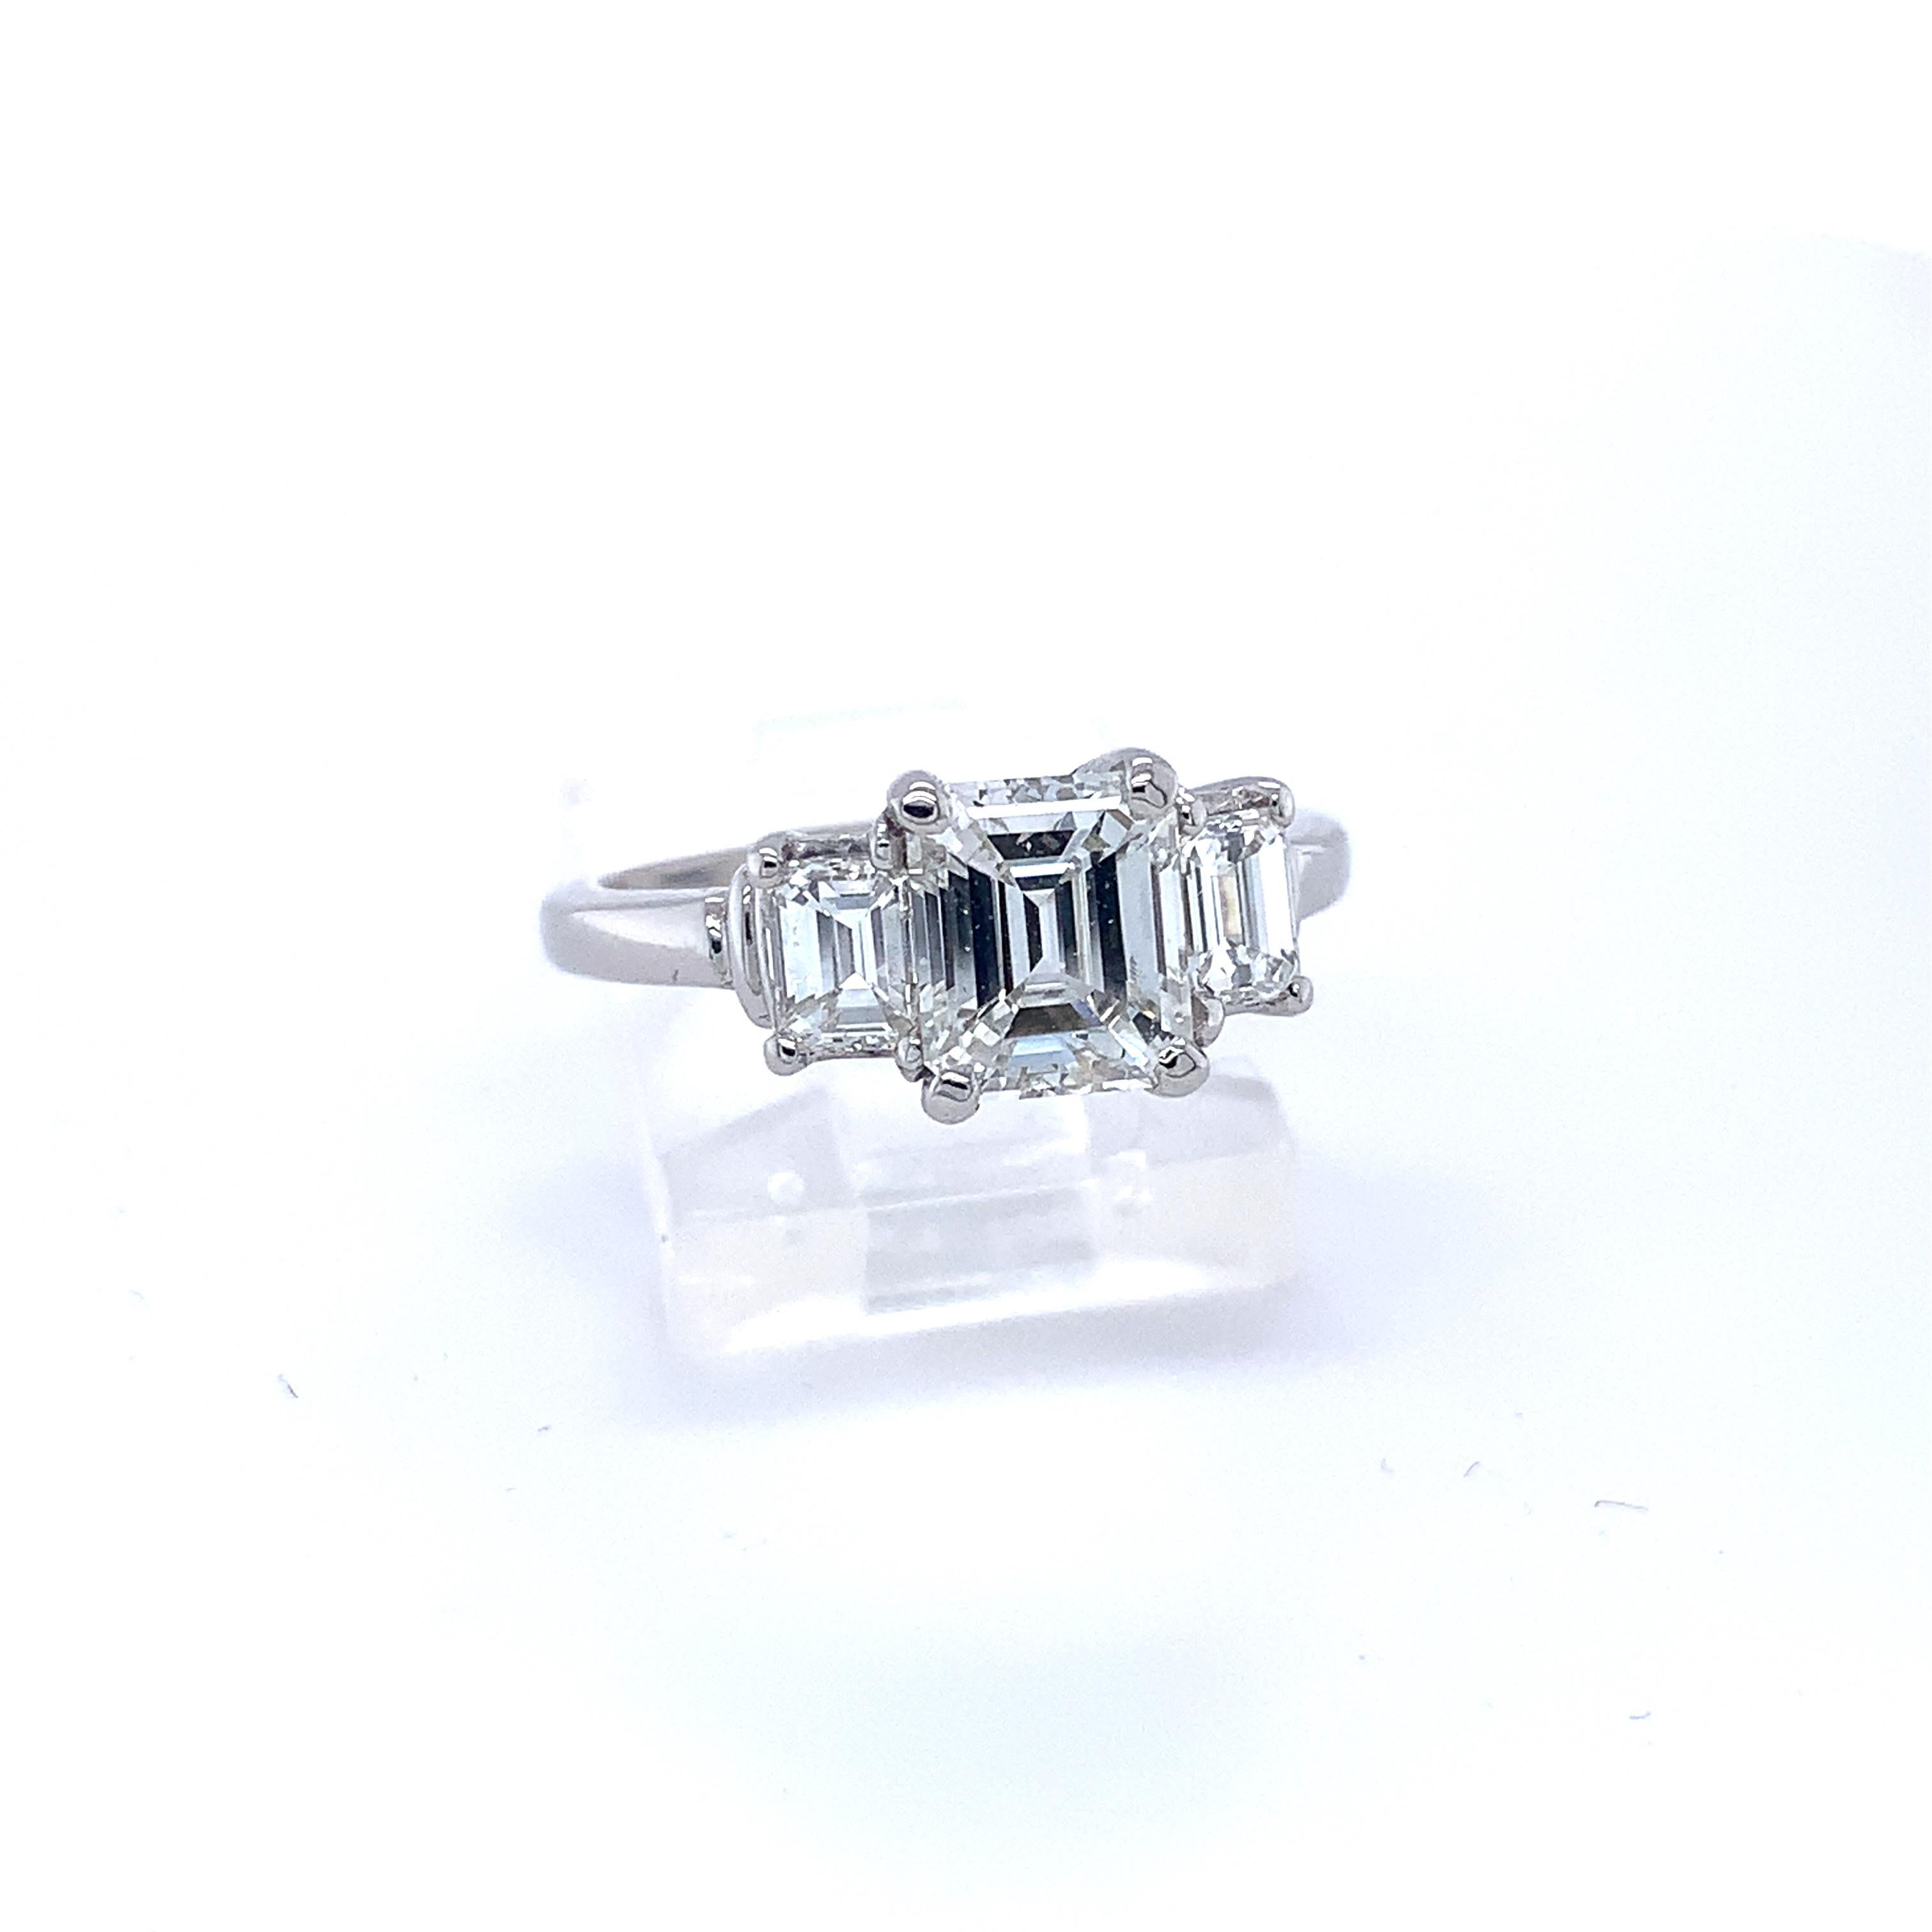 Platinum GIA Emerald Cut 2 Carat TW 3-Stone Genuine Natural Diamond Ring #J4938

Fabulous Platinum three-stone diamond engagement ring featuring a fine 1.39 carat emerald cut diamond with GIA Diamond Grading report stating white I color and super